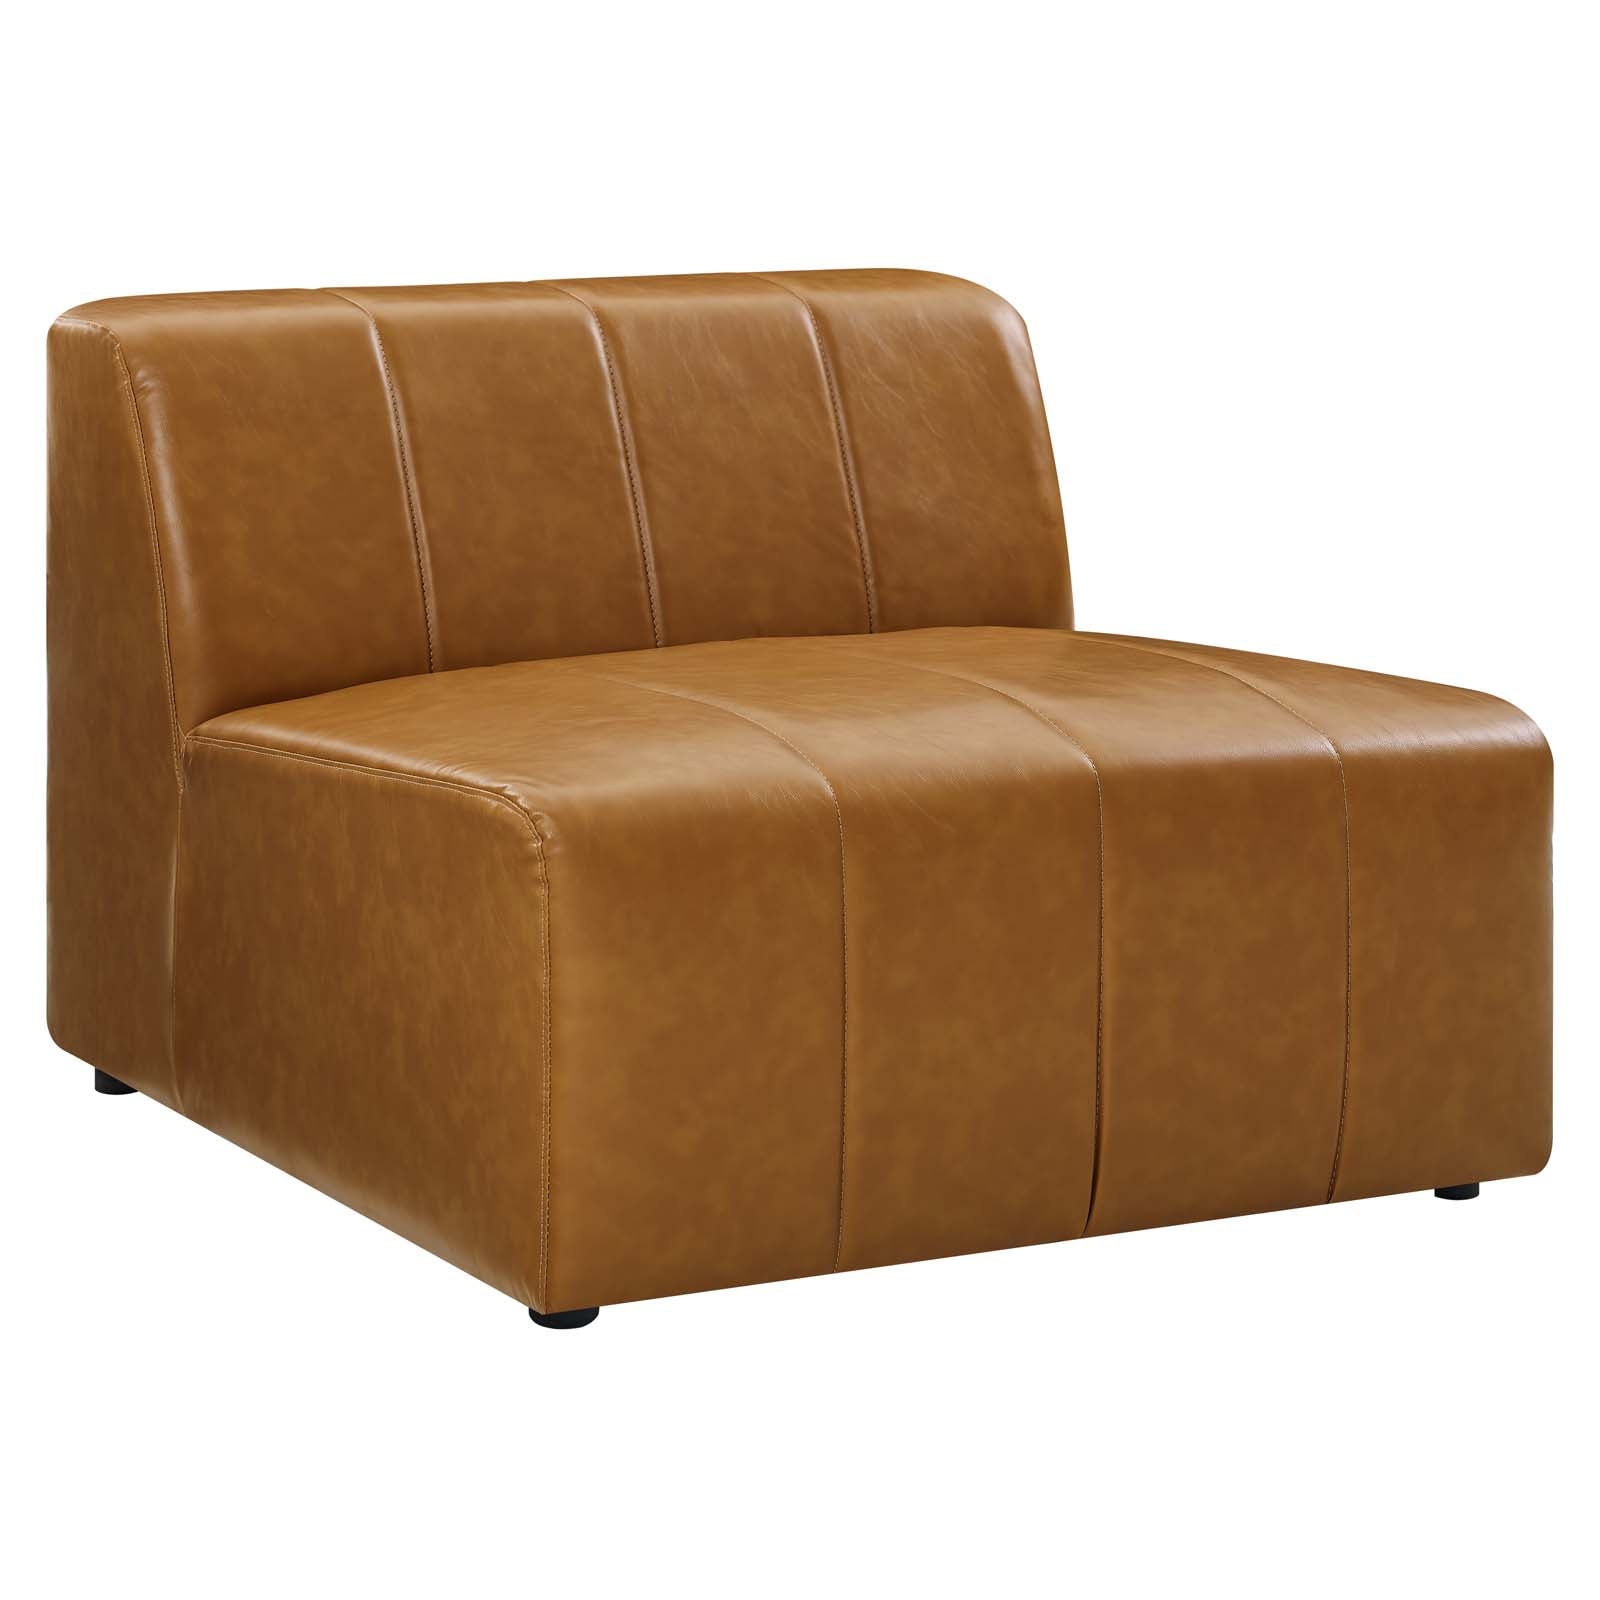 Modway Sectional Sofas - Bartlett Vegan Leather 4-Piece Sectional Sofa Tan